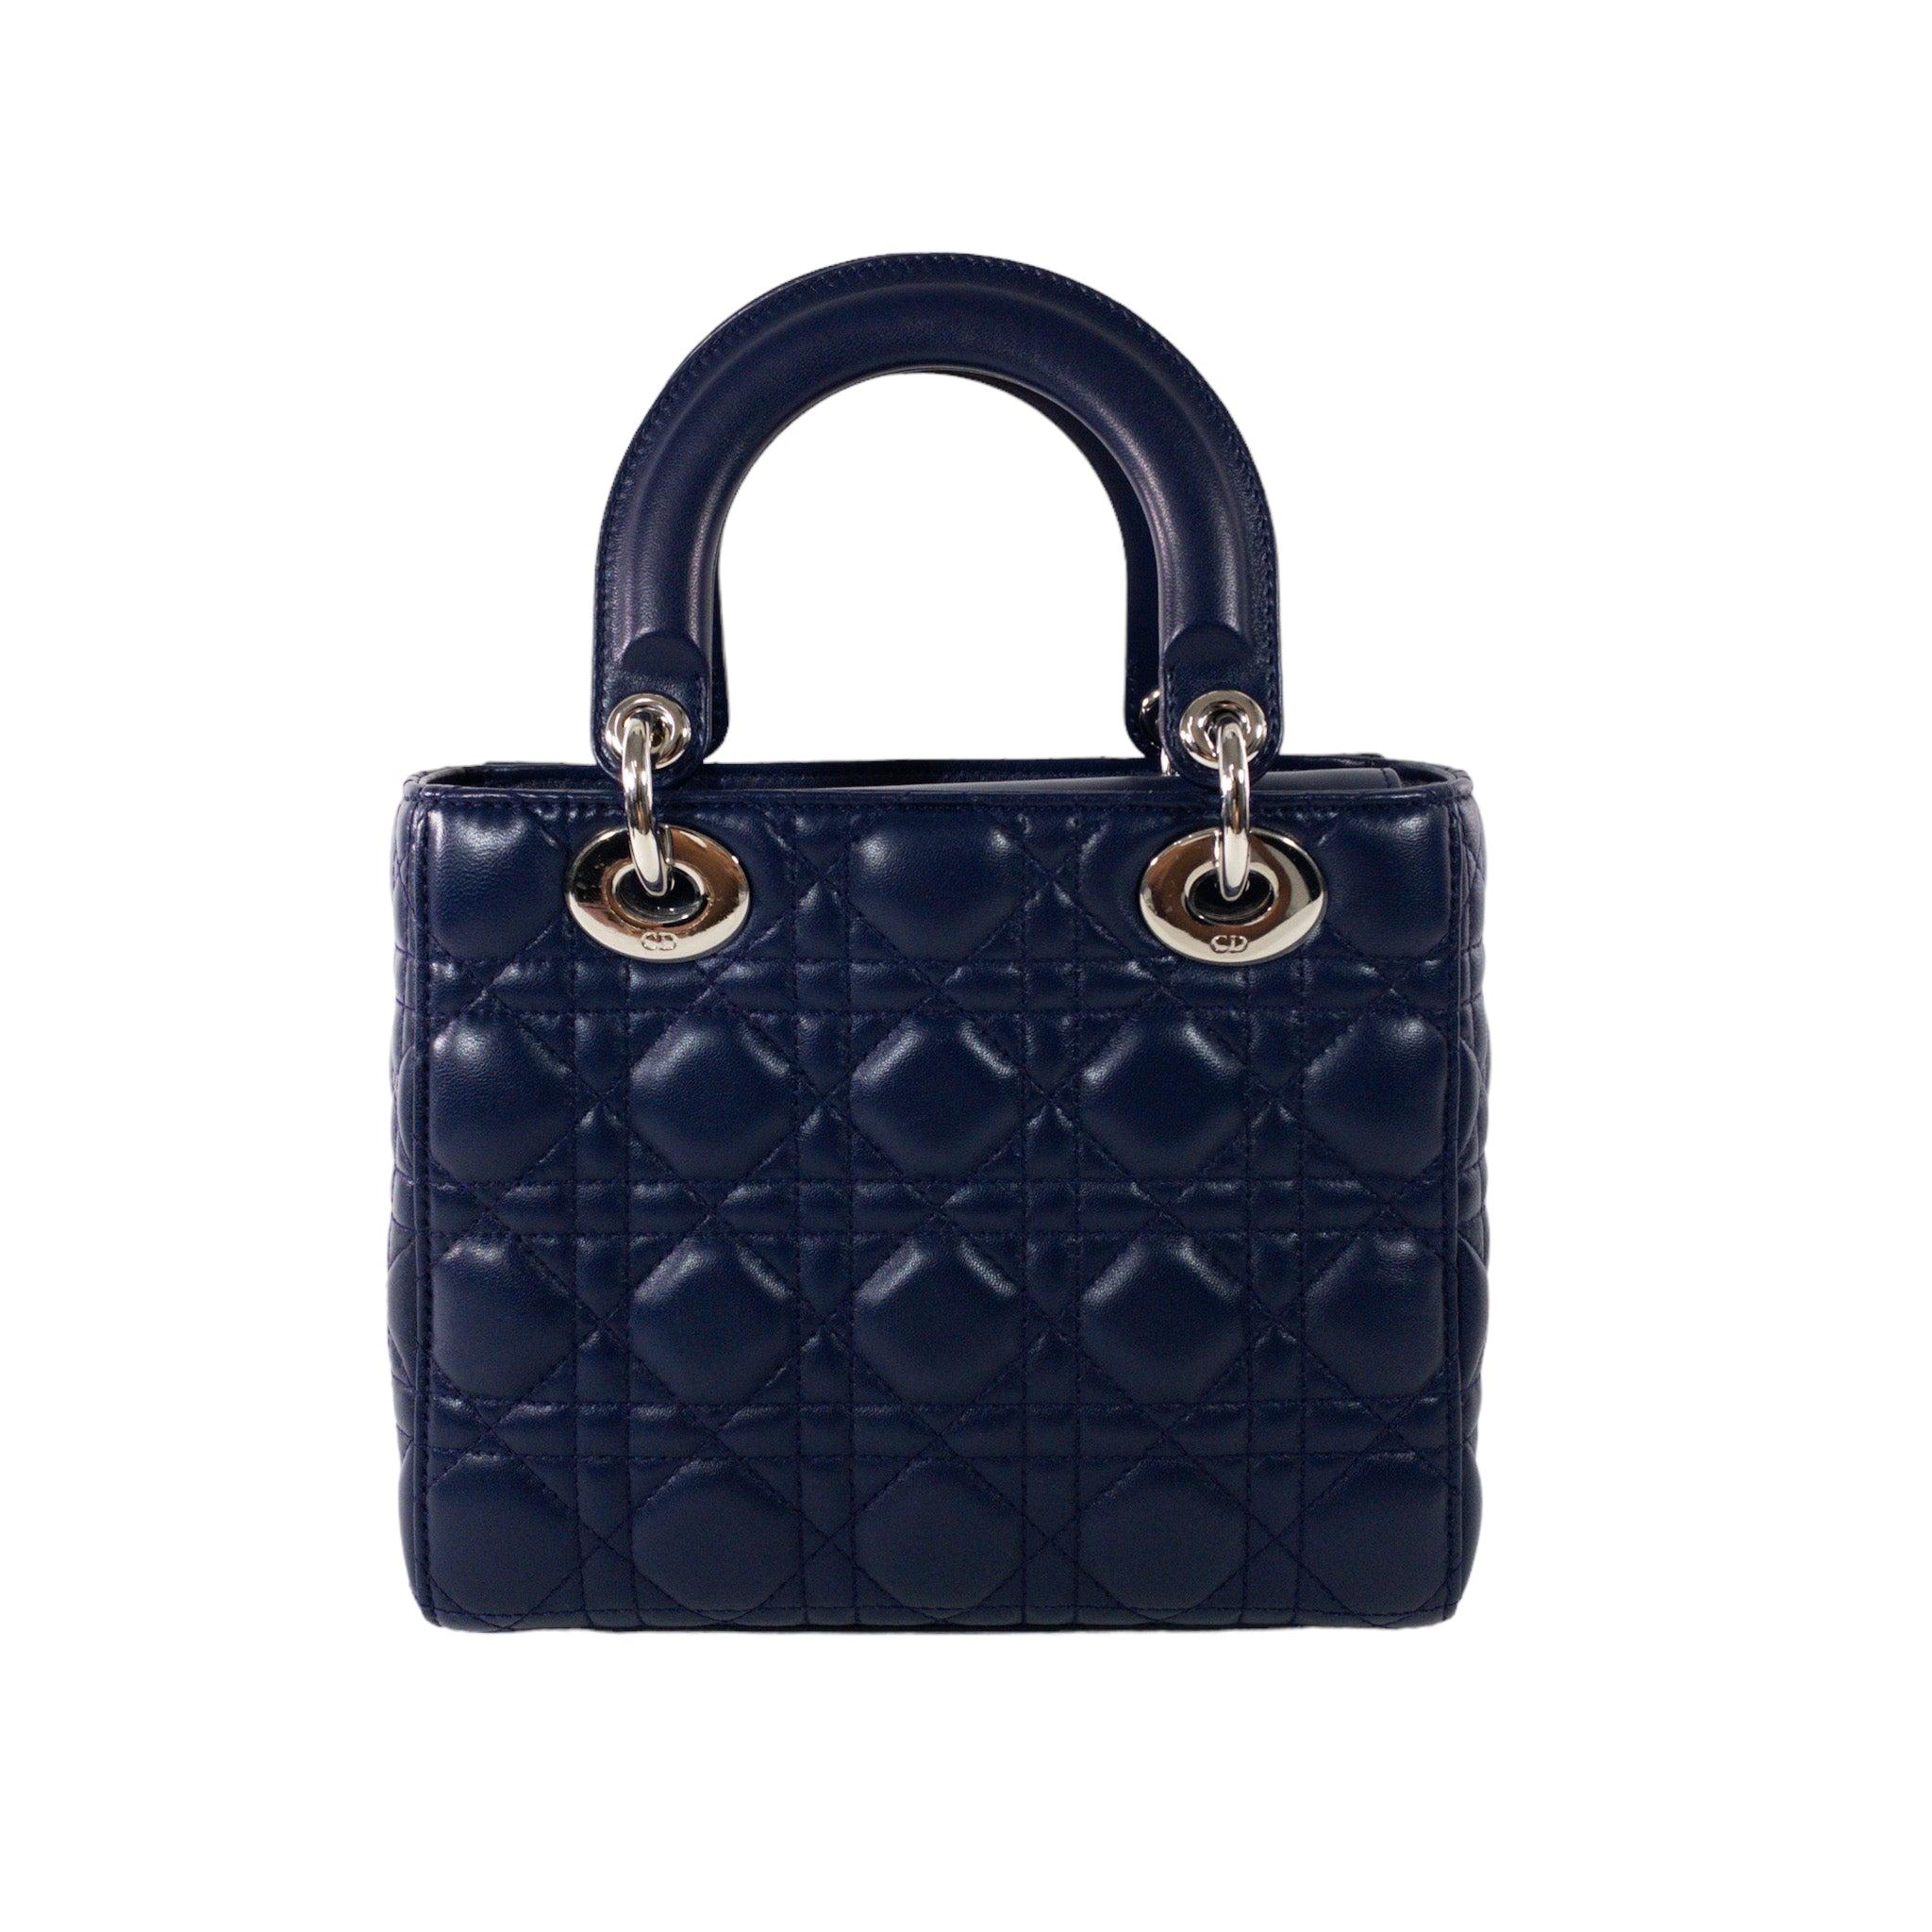 Dior Indigo Small Lady Dior with Charm Strap SHW Bag

This is an Authentic Dior Lady Dior in size Small. Indigo/ Purple Cannage-quilted lambskin exterior. Two top handles with removable strap. Strap comes with set of charms. New model Lady Dior with